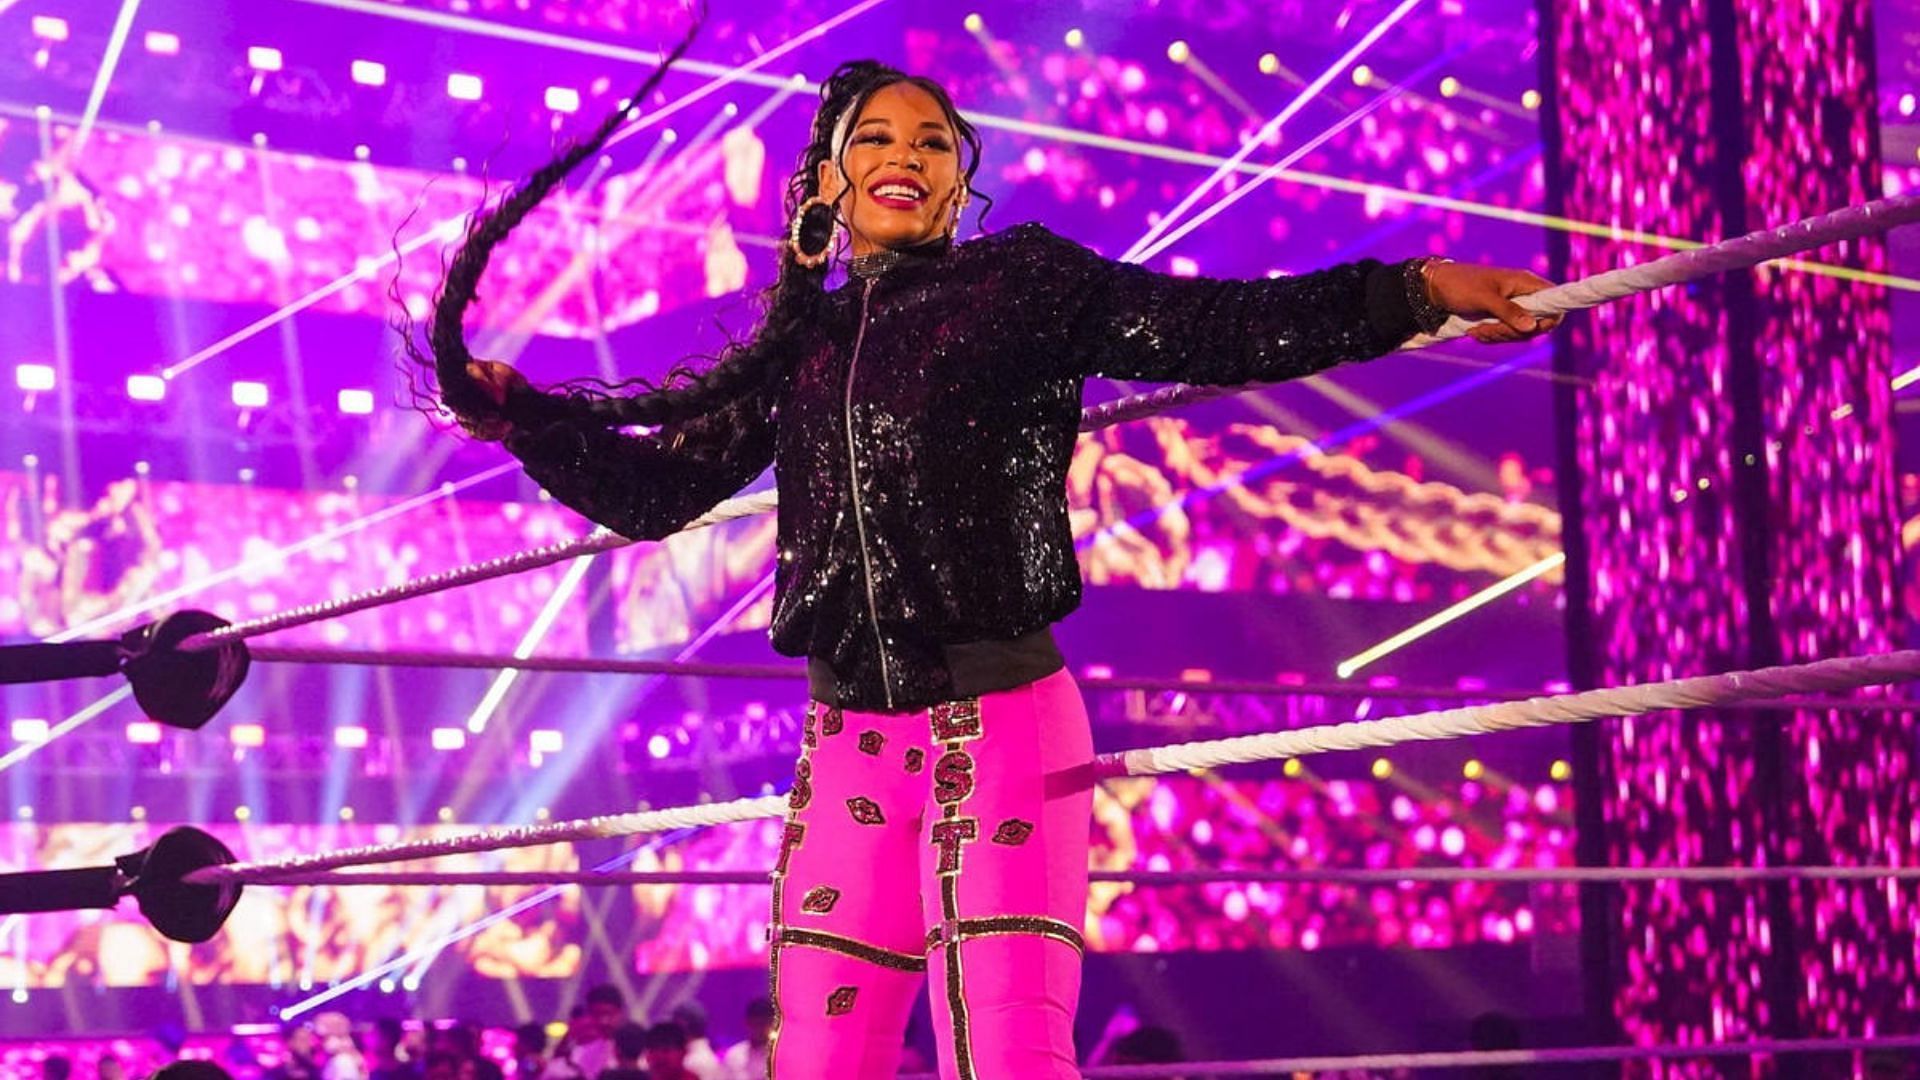 Bianca Belair is one of the top performers on WWE